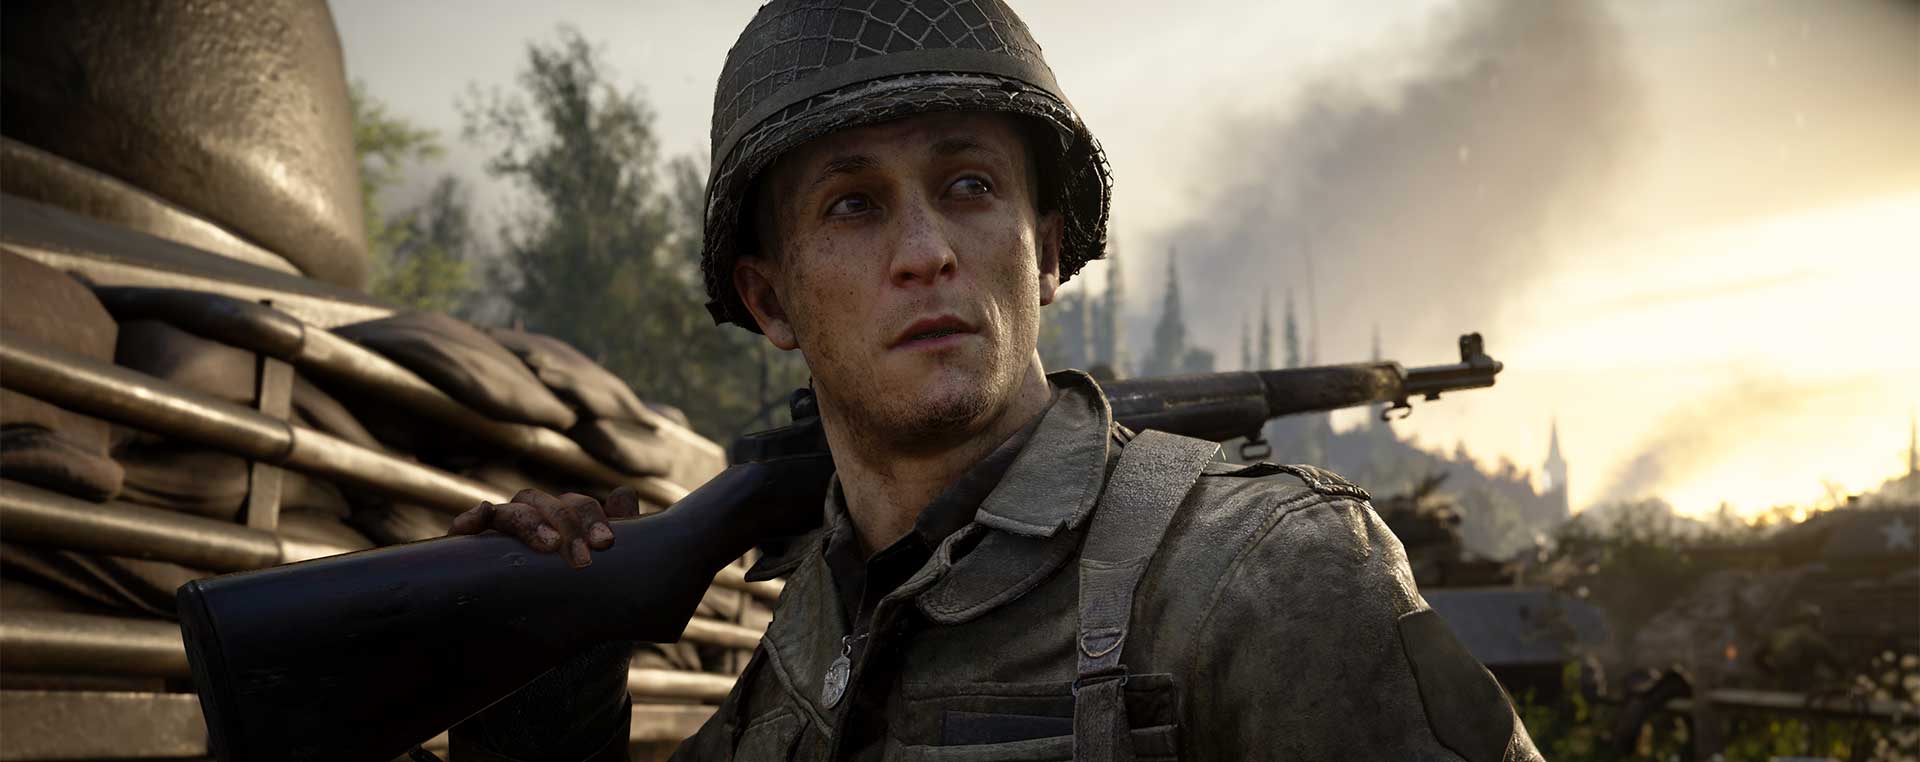 when are paint jobs coming to call of duty world war ii